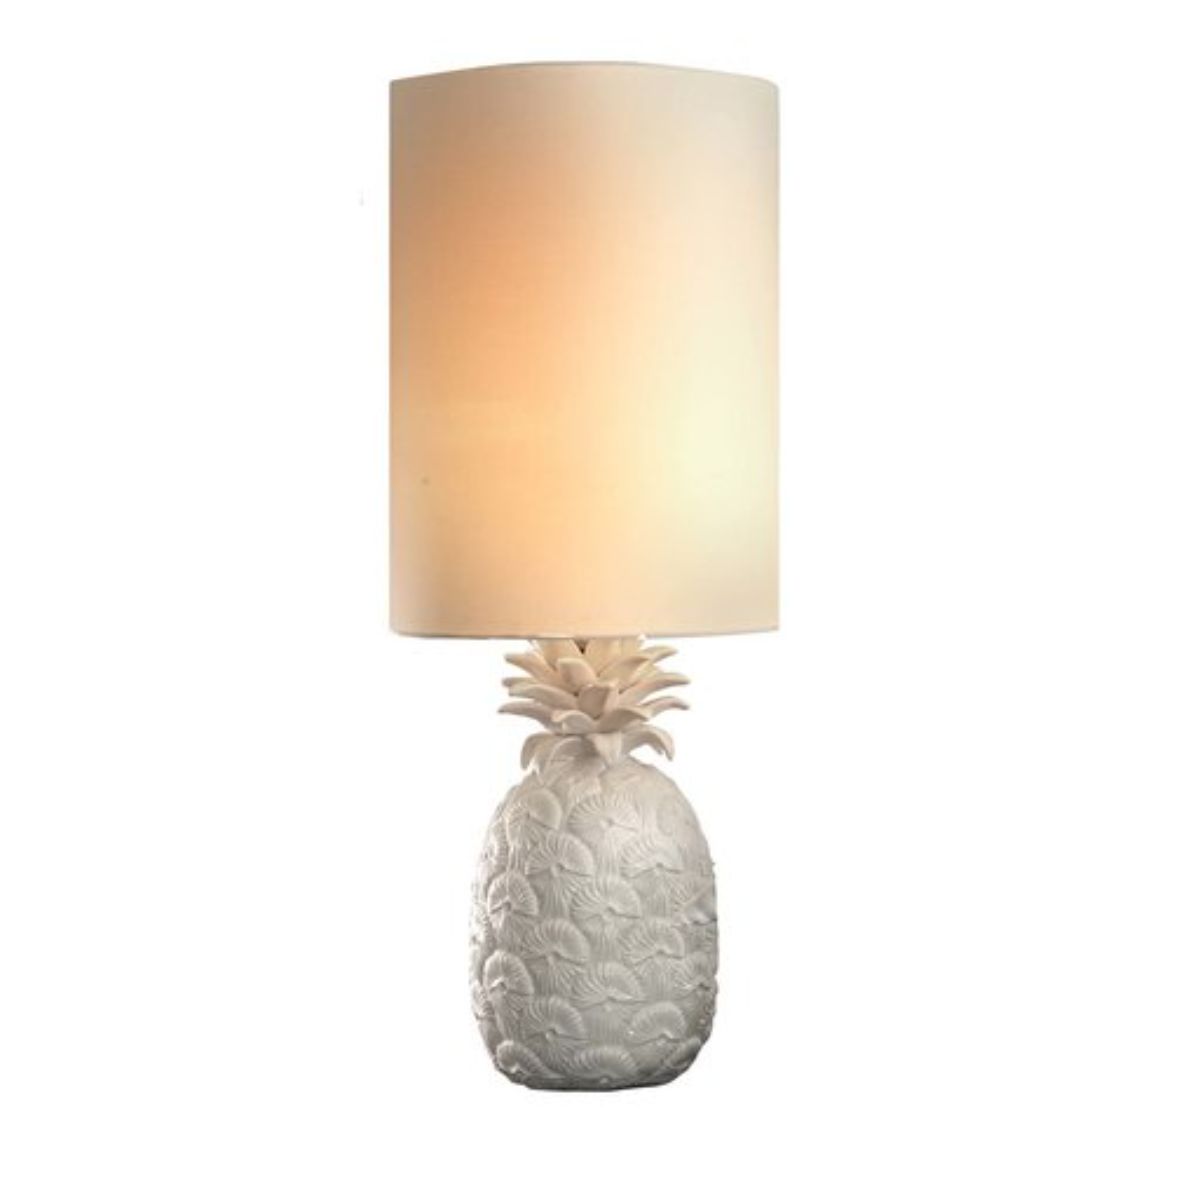 Ananas Small Table Lamp - White